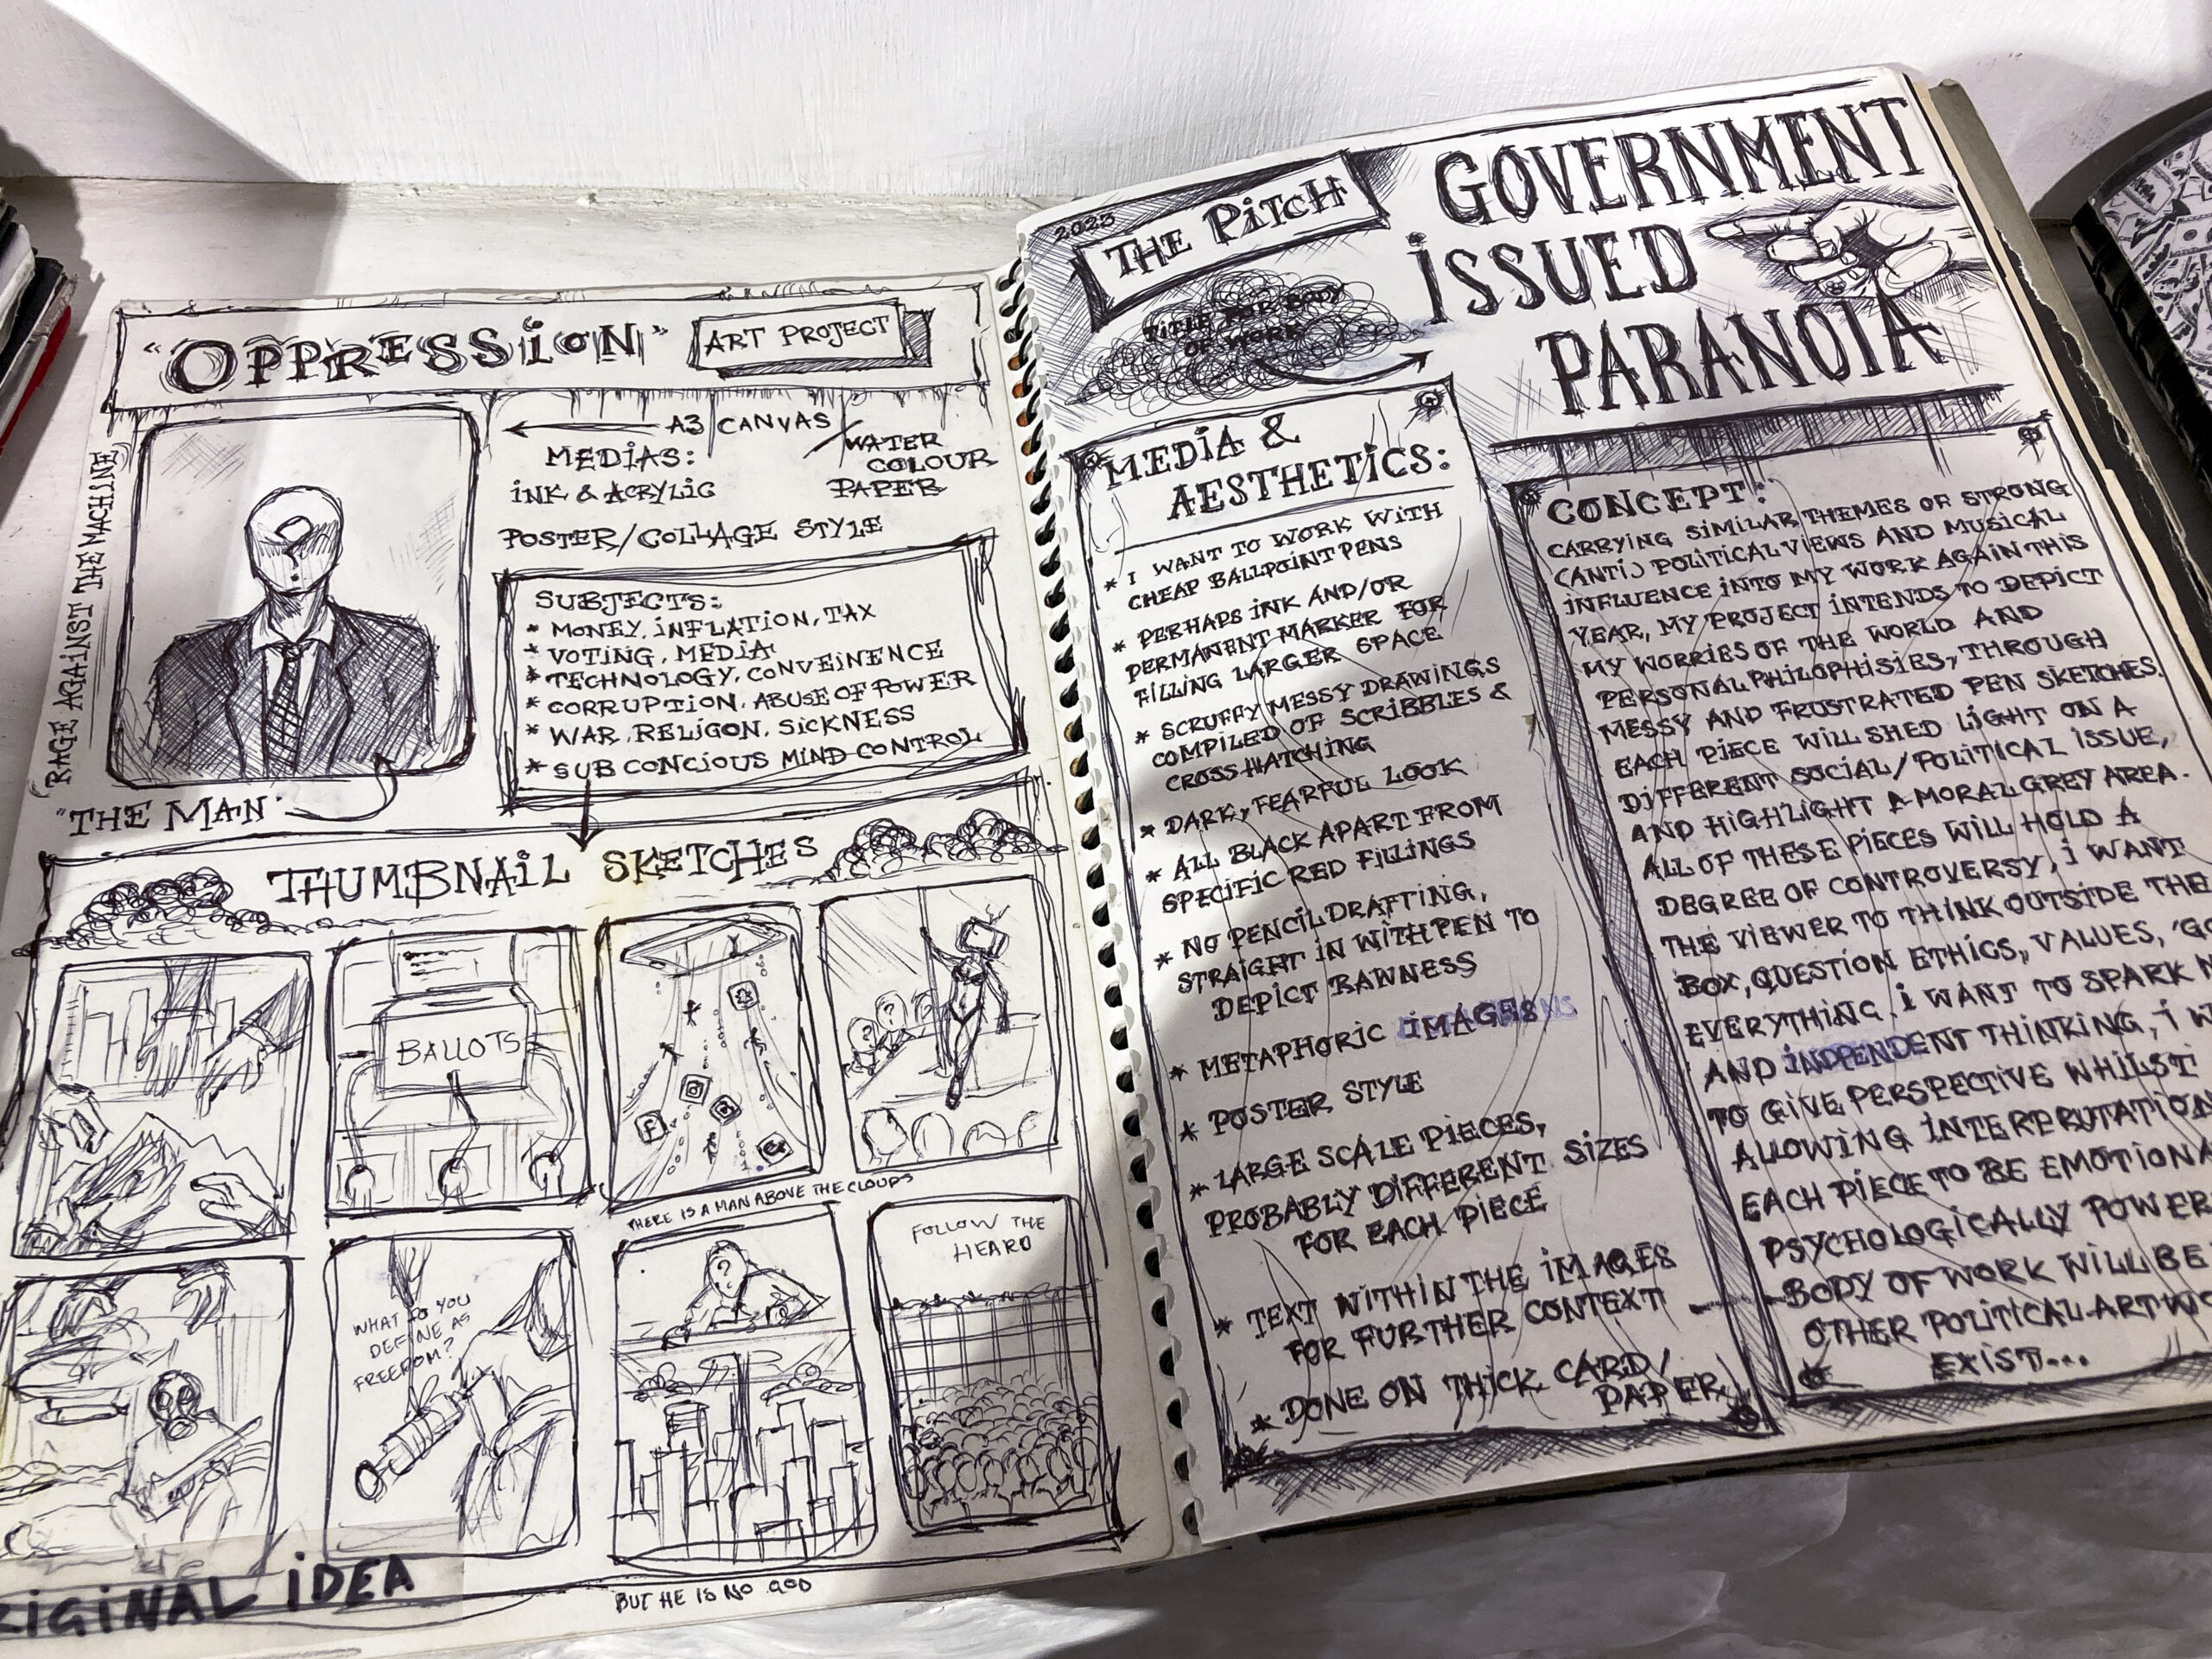 A double page spread from an art journal made with black pen on white paper exploring the concept of 'Government issued paranoia'